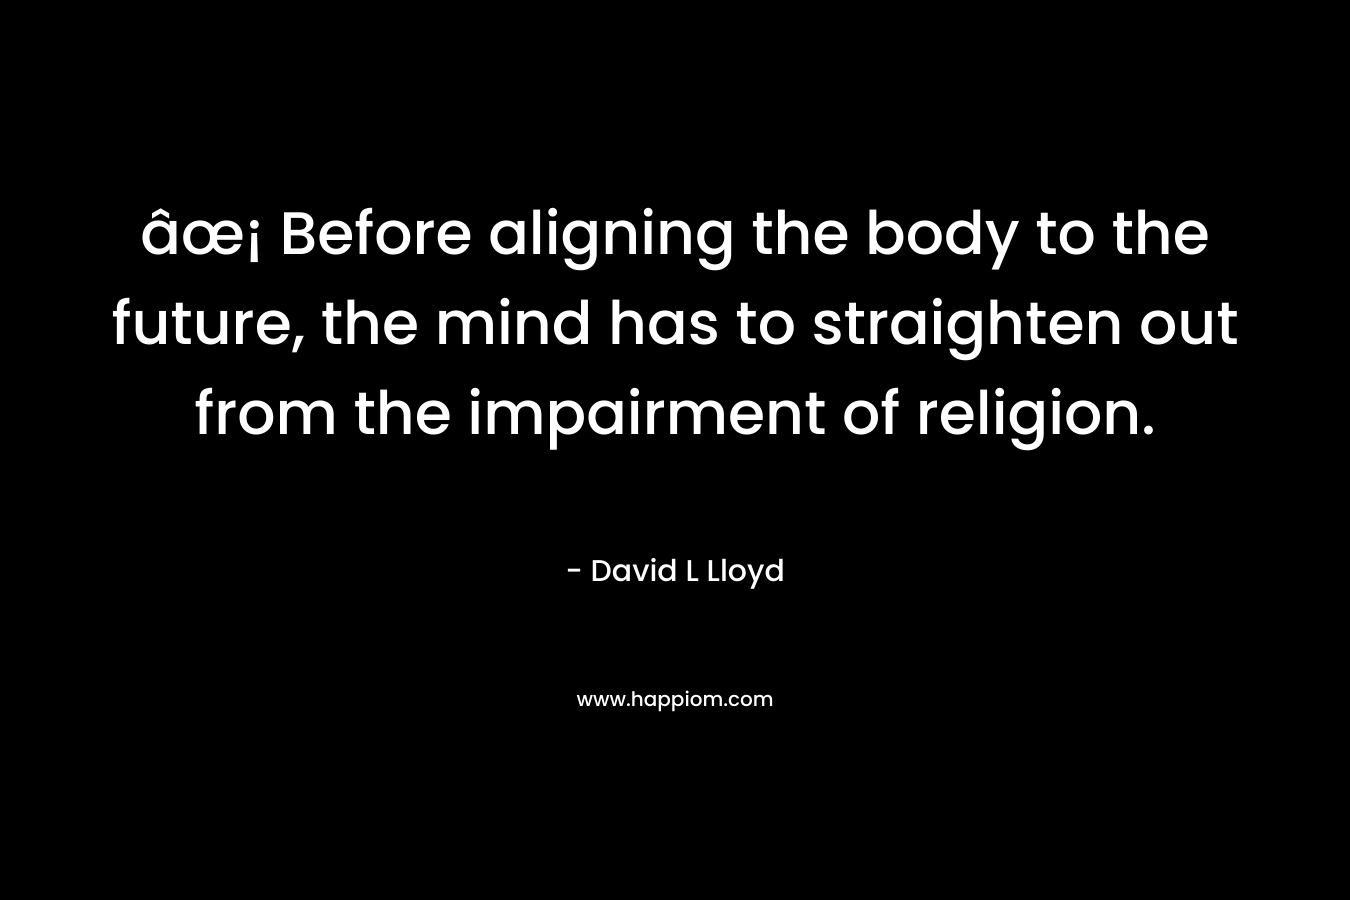 âœ¡ Before aligning the body to the future, the mind has to straighten out from the impairment of religion. – David L Lloyd